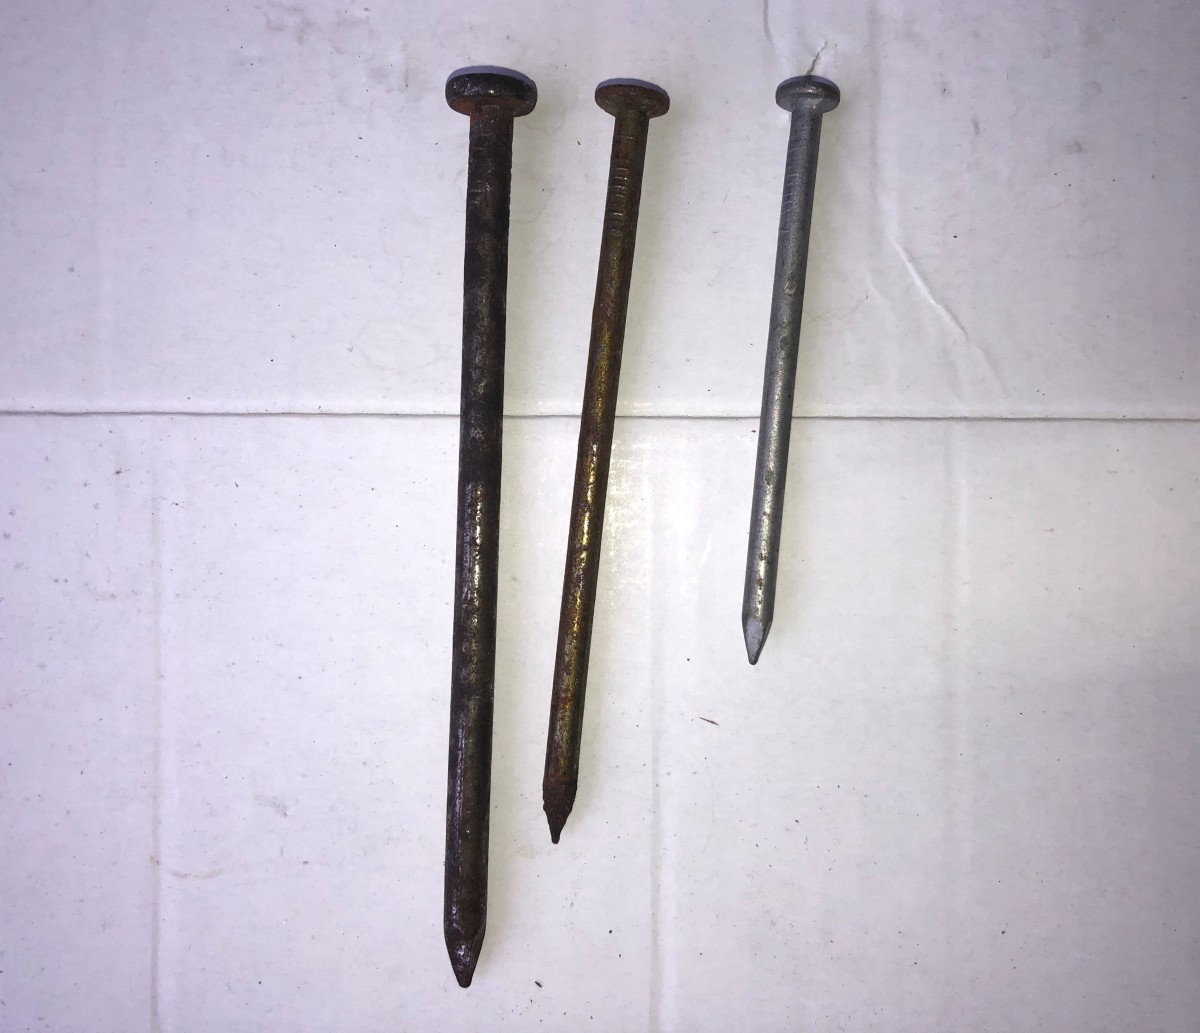 Three different common nails.